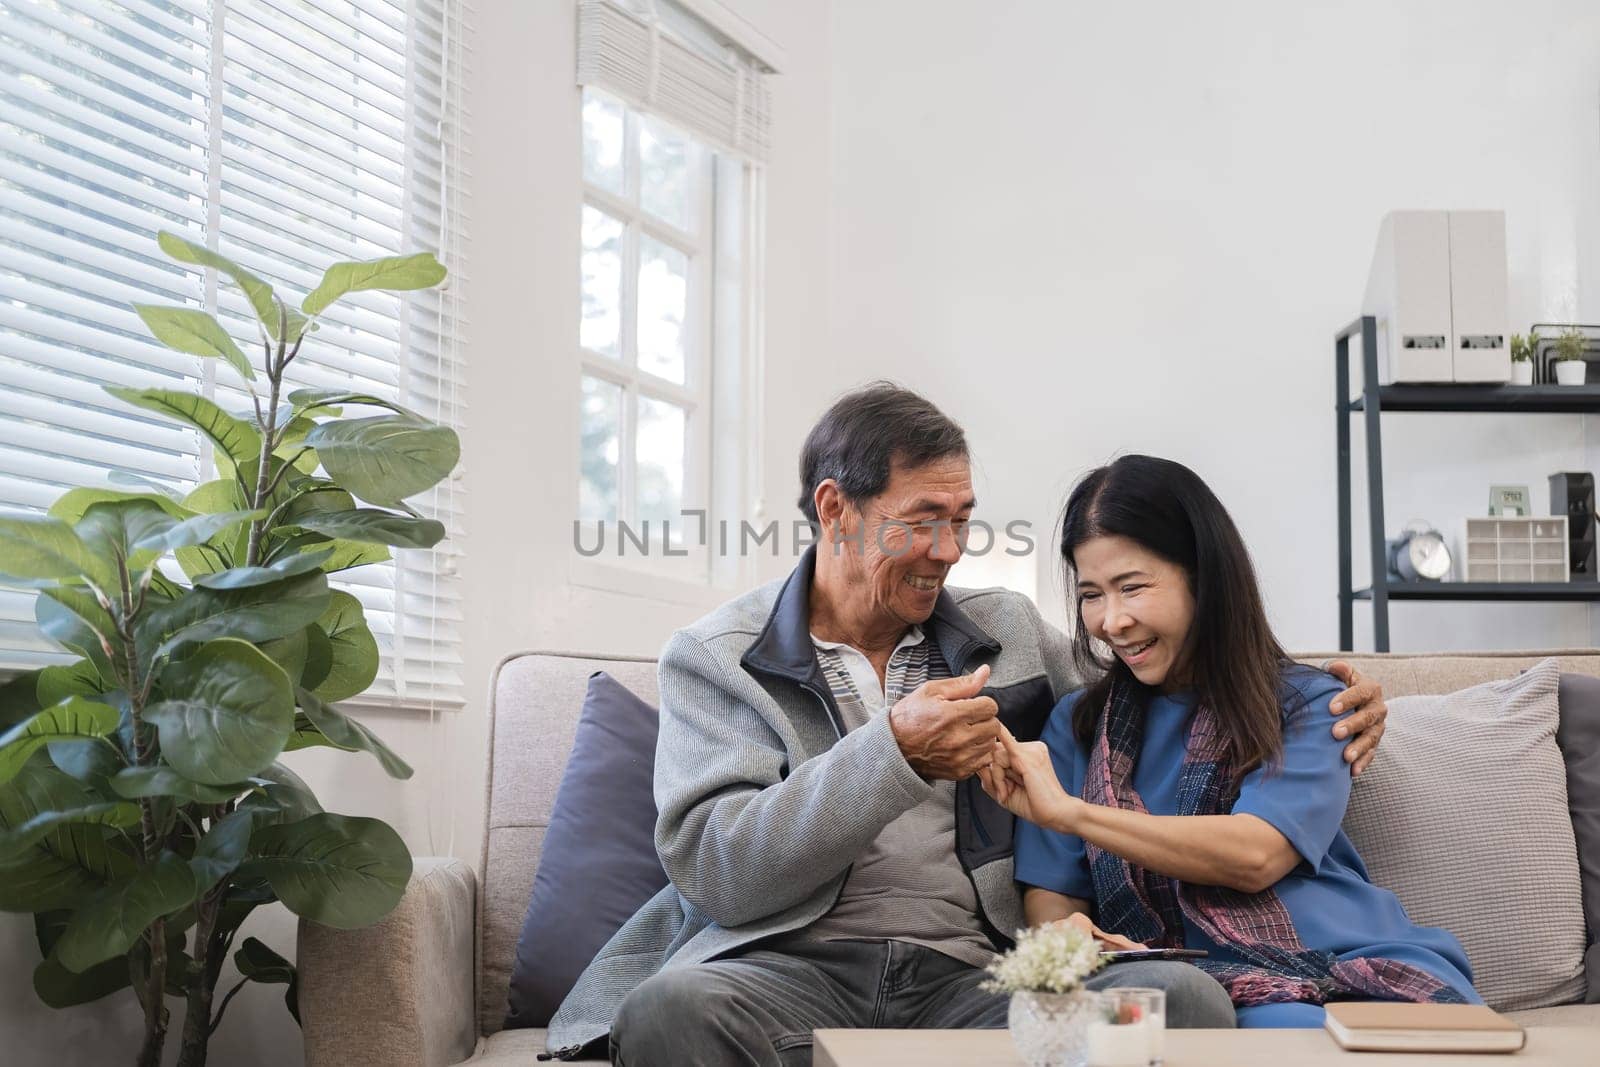 Elderly couple relaxing in a modern living room, enjoying quality time together, smiling and happy in a cozy home environment.